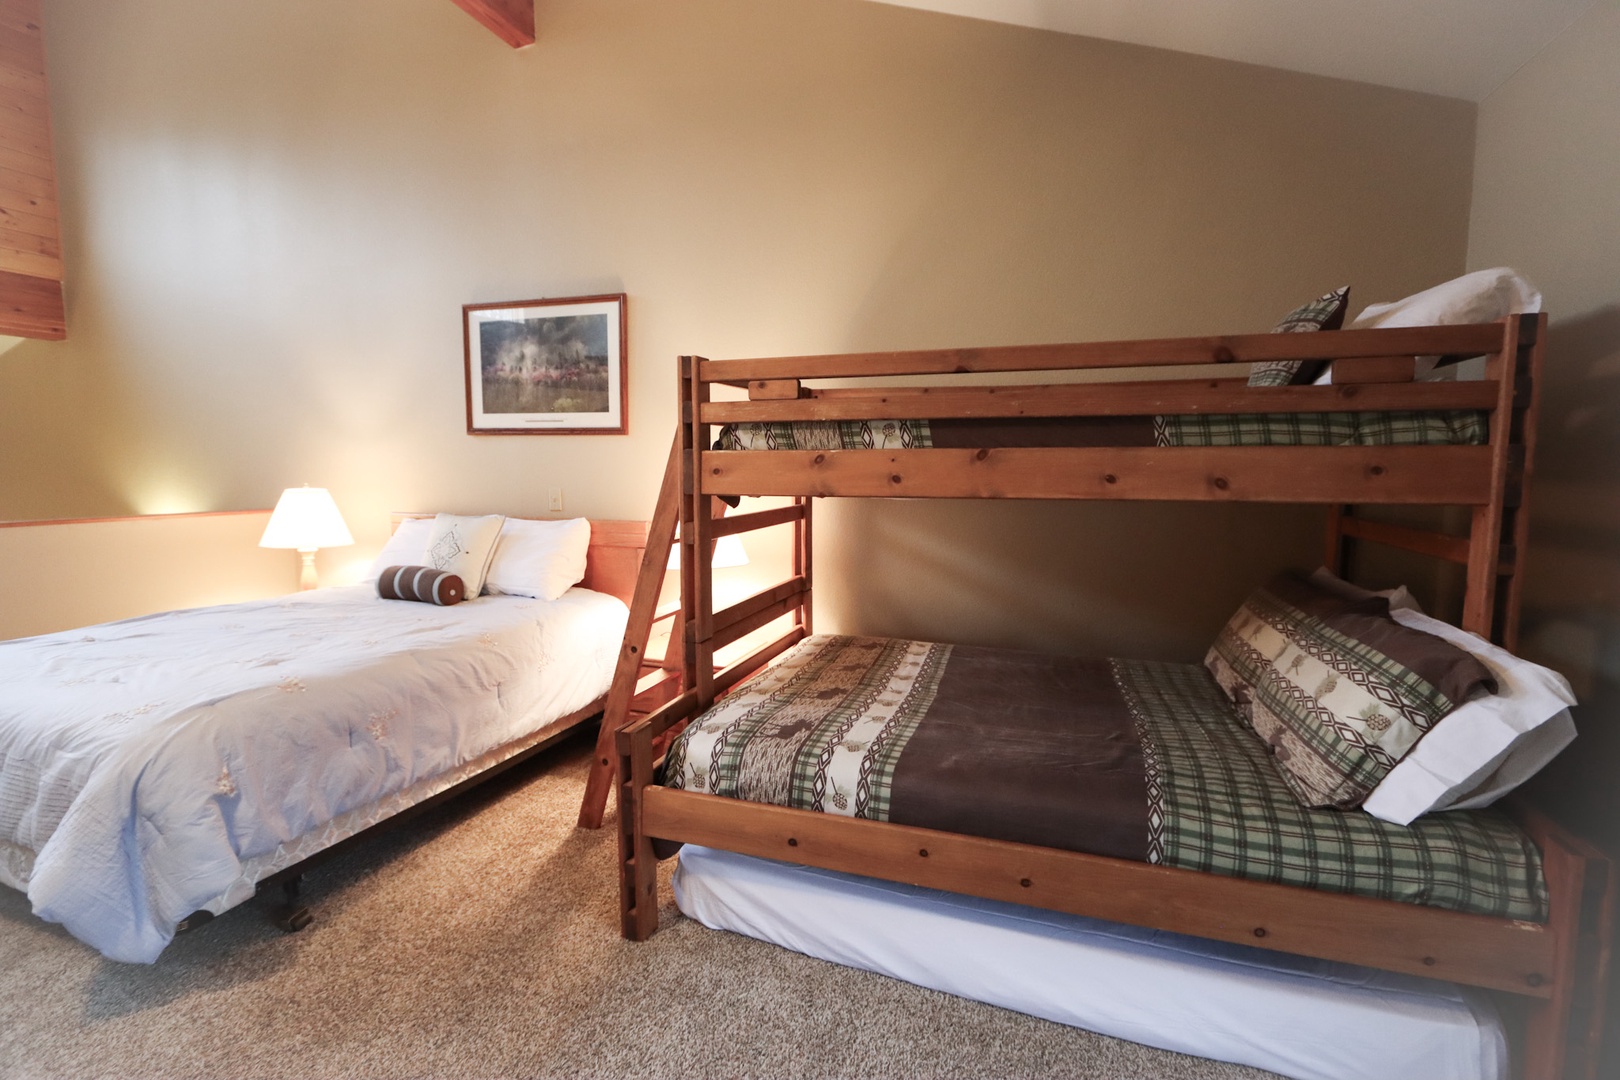 Find an additional queen bed & twin-over-full bunkbed in the spacious loft